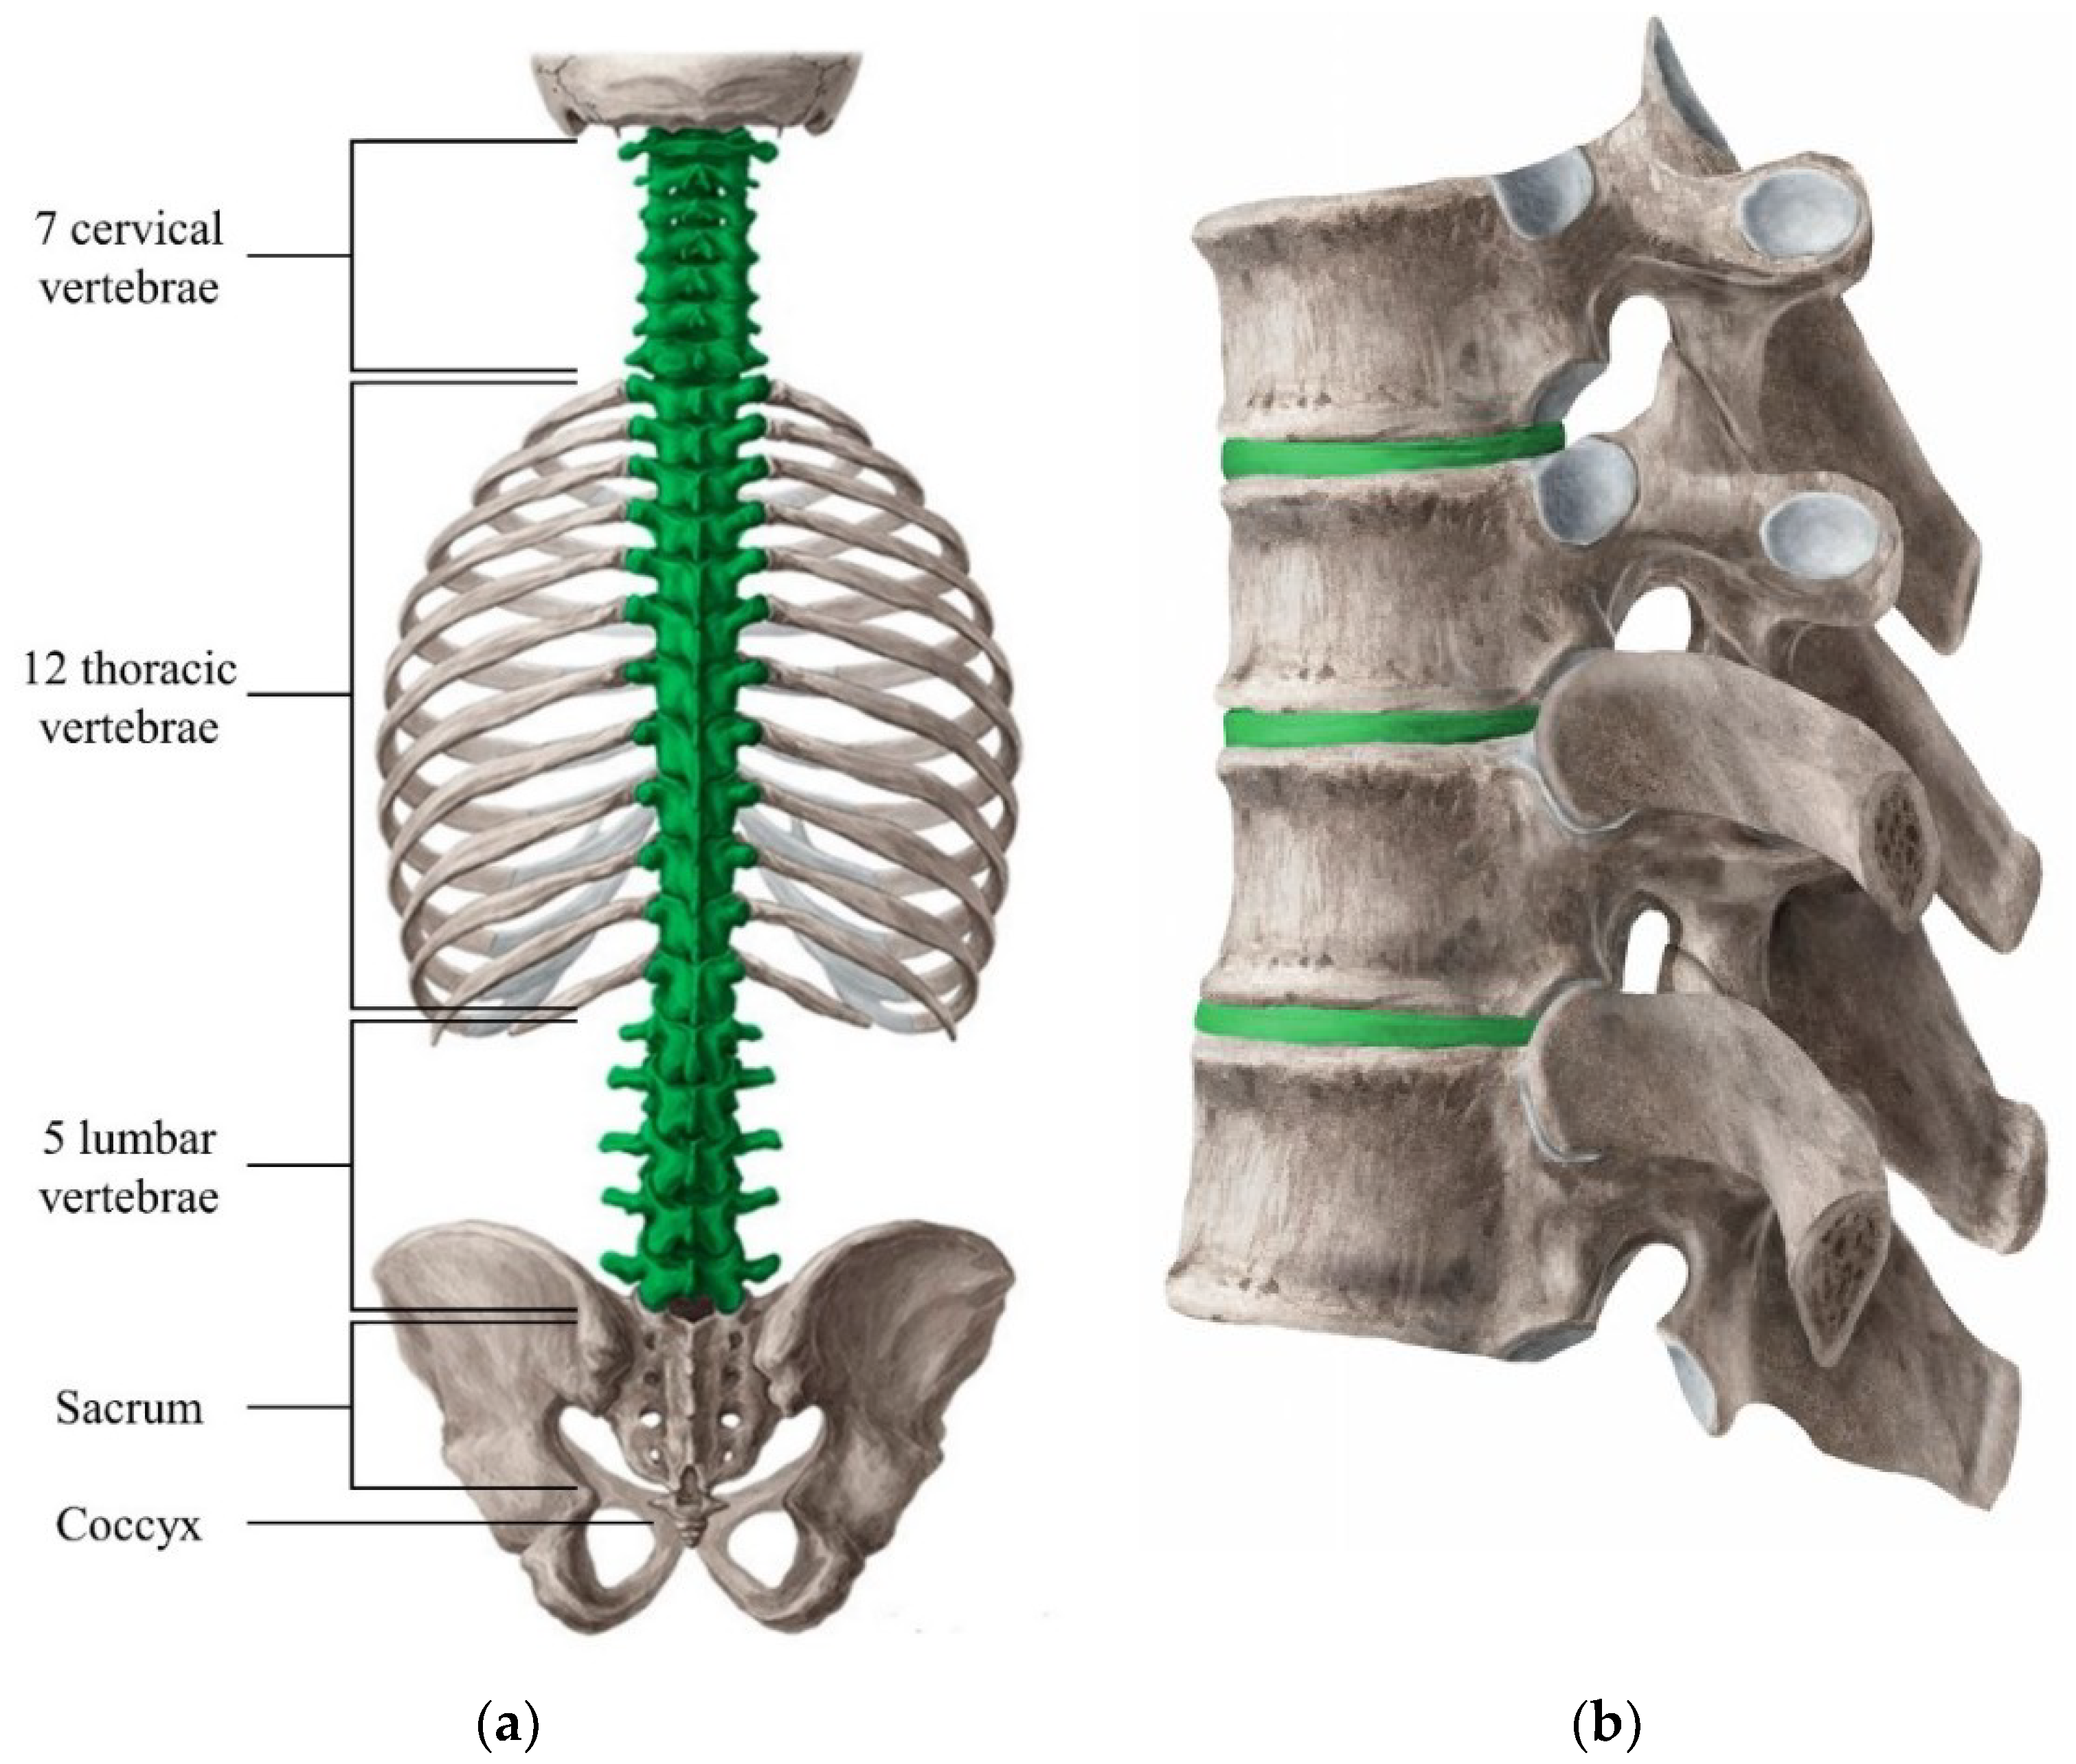 Rib cage morphometric differences between a normal 58-year-old male